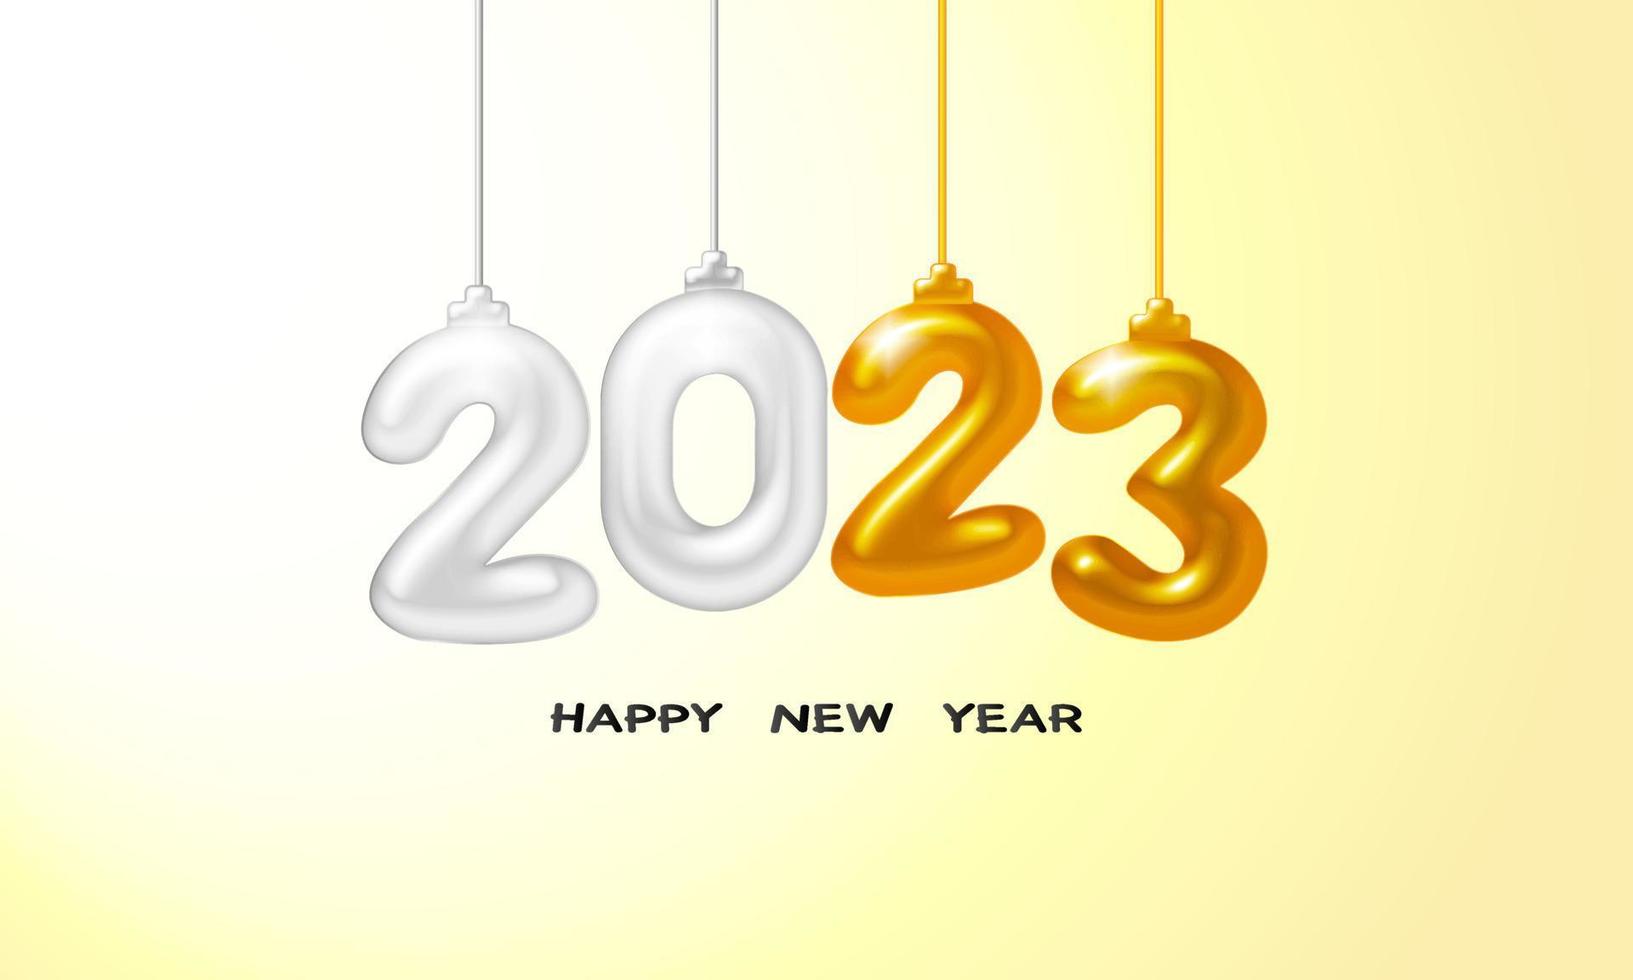 Happy New Year 2023. Holiday vector illustration of silver and gold metallic numbers 2023. Realistic 3d sign. Festive poster or banner design.